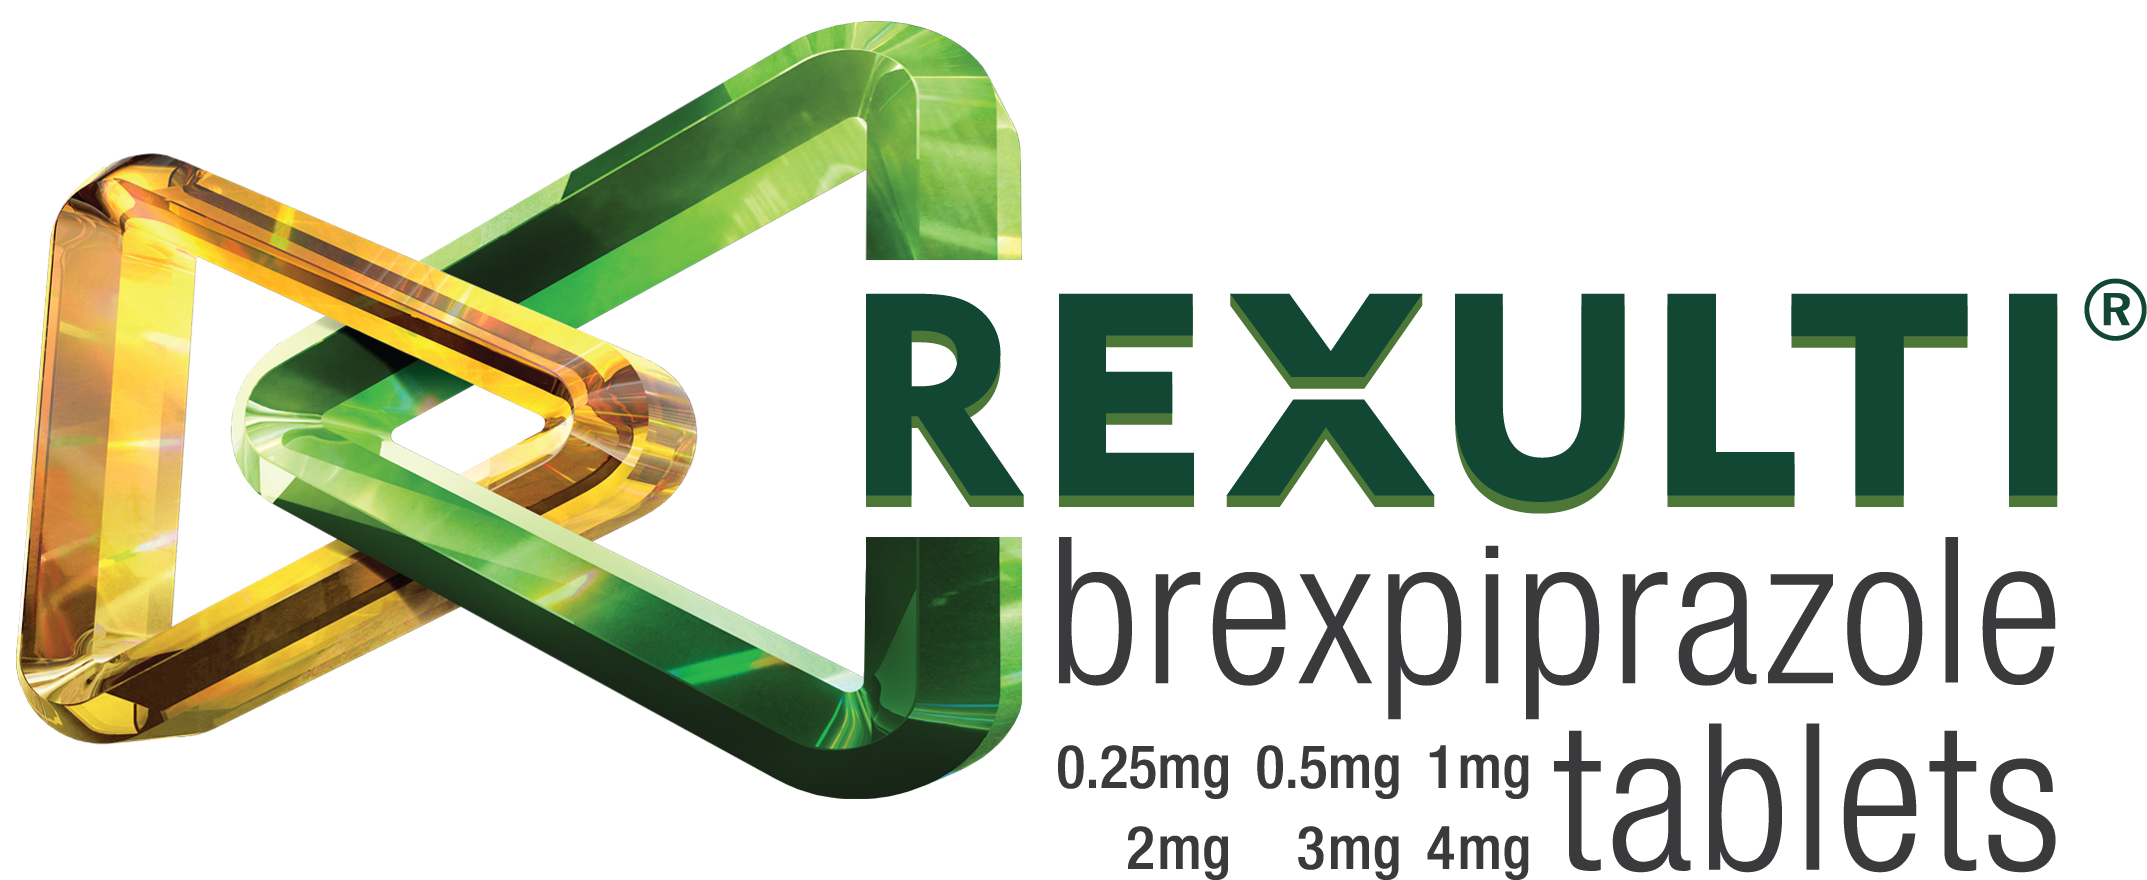 Rexulti Prices, Coupons & Savings Tips GoodRx